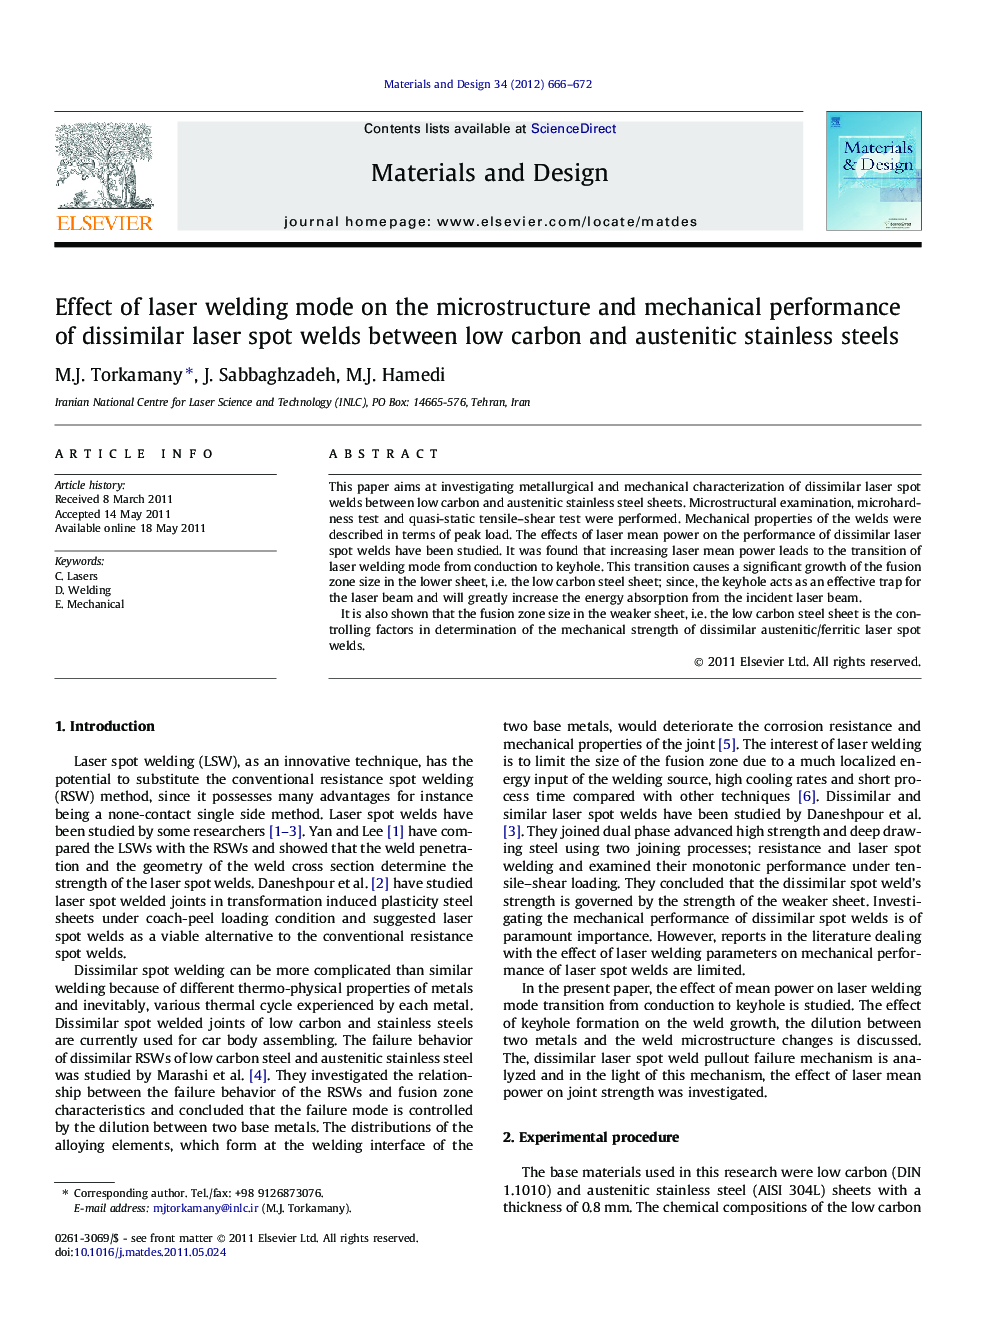 Effect of laser welding mode on the microstructure and mechanical performance of dissimilar laser spot welds between low carbon and austenitic stainless steels